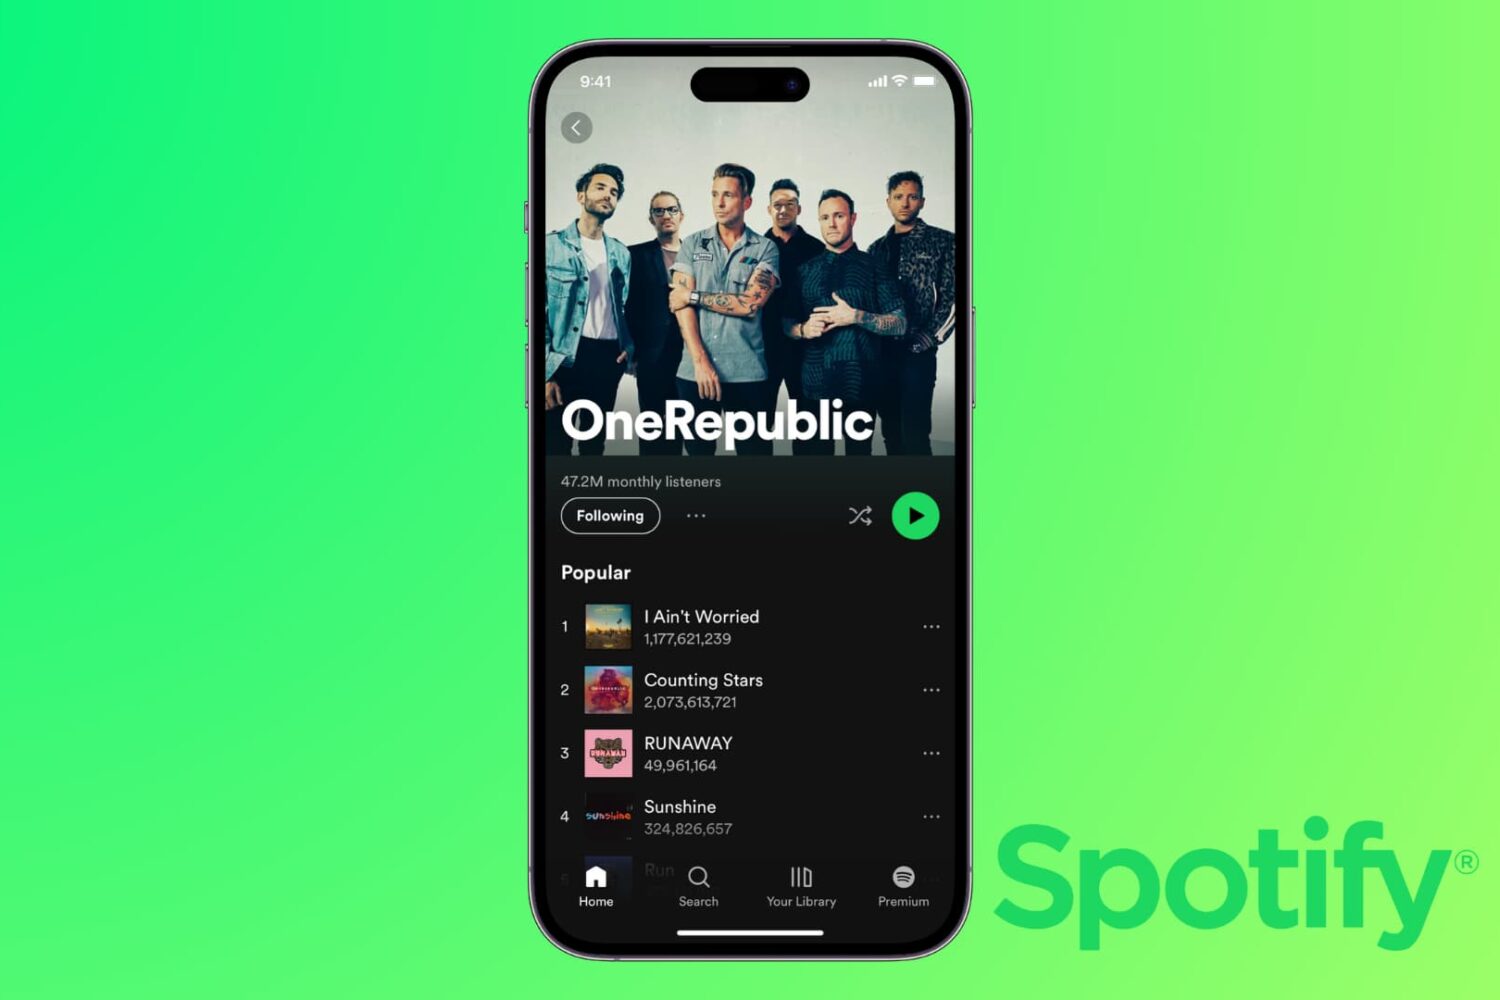 One Republic artist page in Spotify app on iPhone